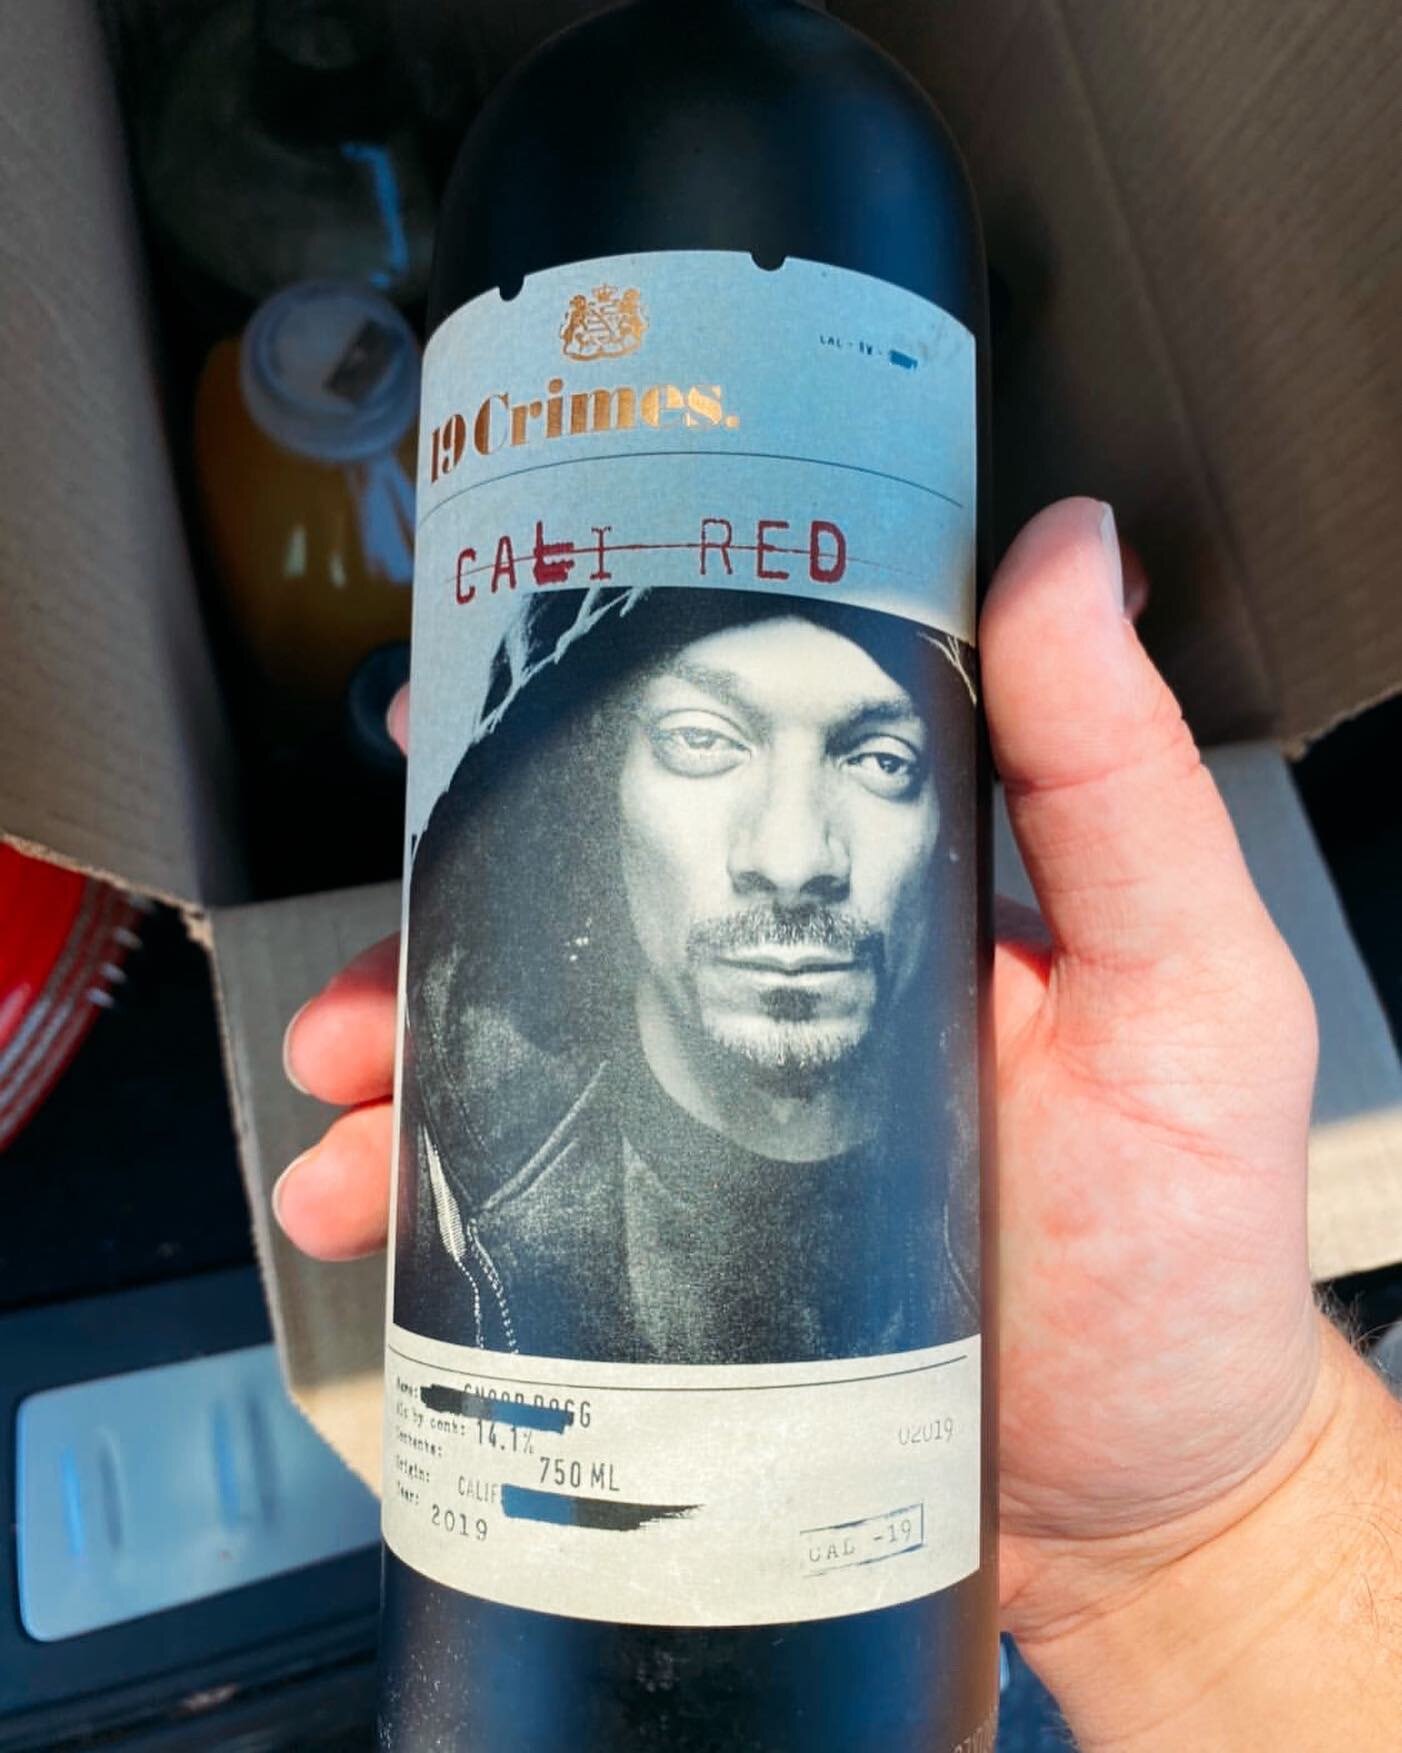 This is probably my fave wine collab ever @19crimes and @snoopdogg 🍷🙌🏼 Now I just need to find a bottle to drink...
.
📷: @zackedison 
.
.
.
.
.
.
.
.
.
.
.

#winelover #wine #wines #vin #vino #vina #wien #wijn #cheers #winepairing #winetasting #w